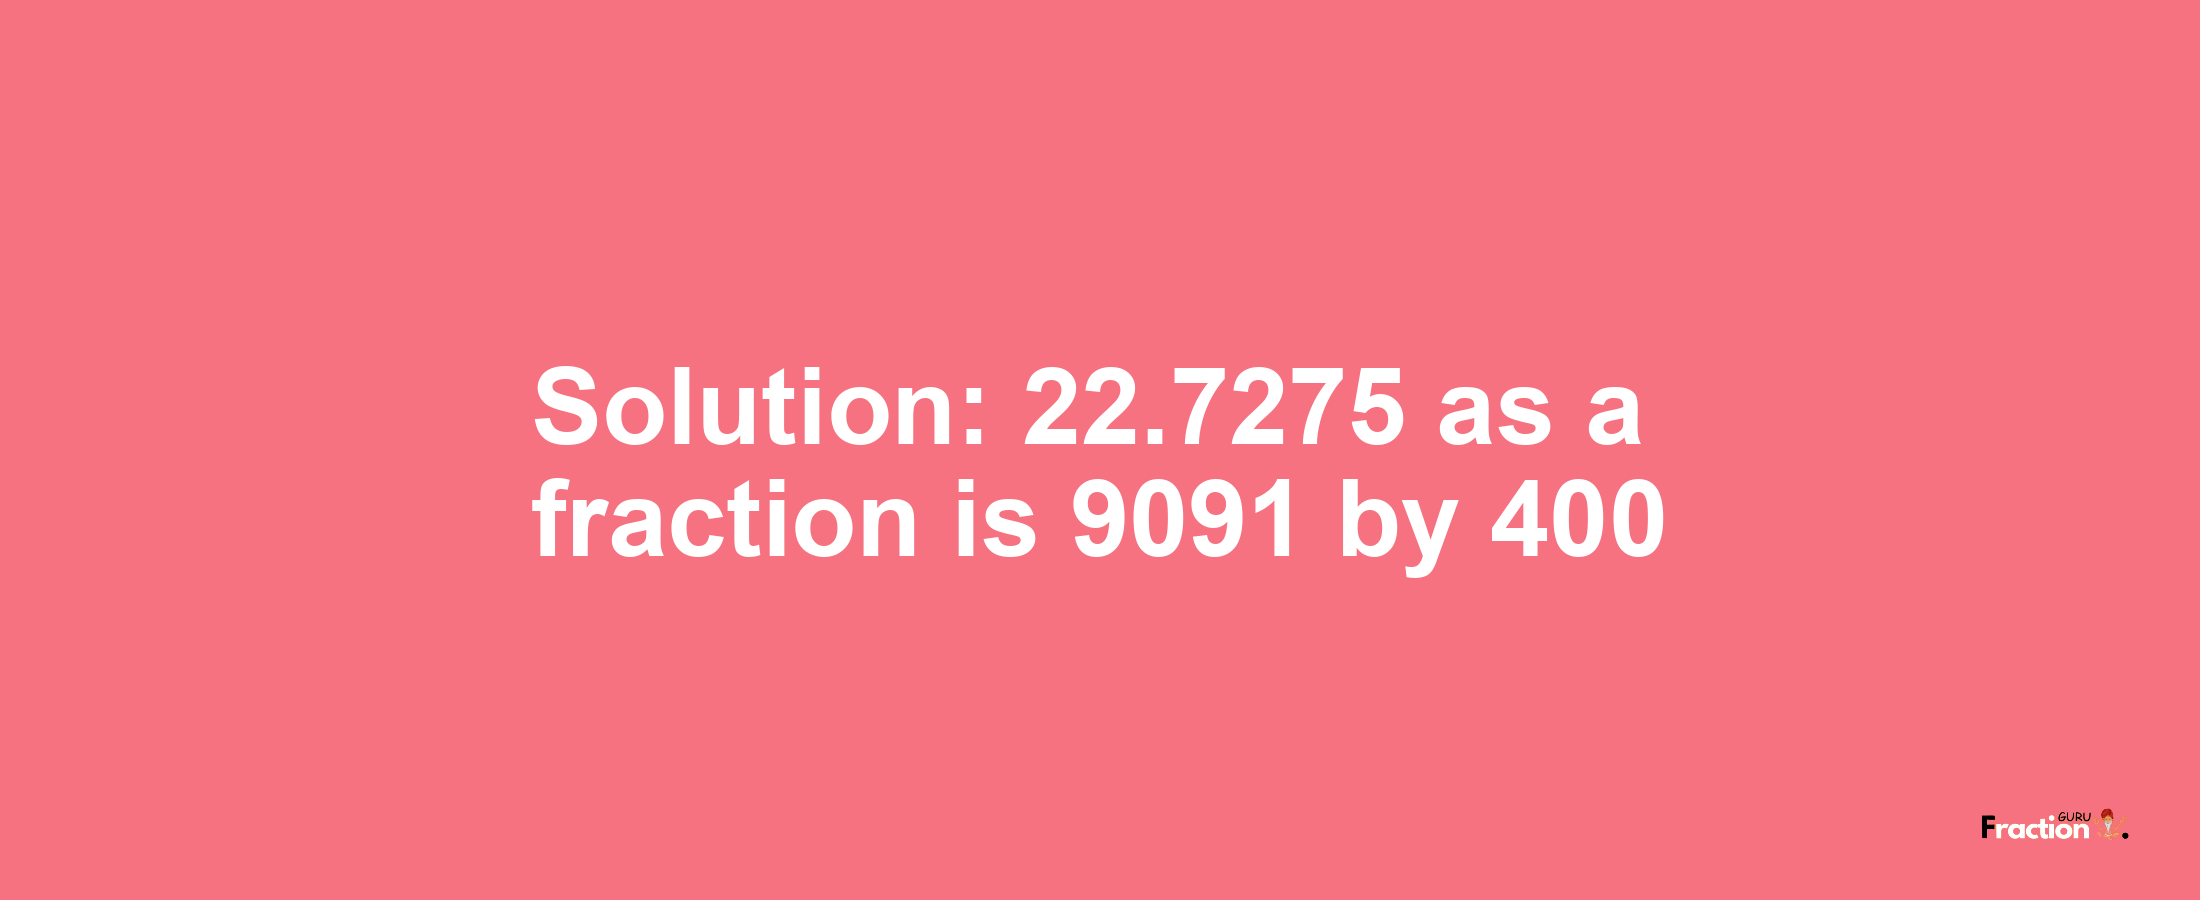 Solution:22.7275 as a fraction is 9091/400